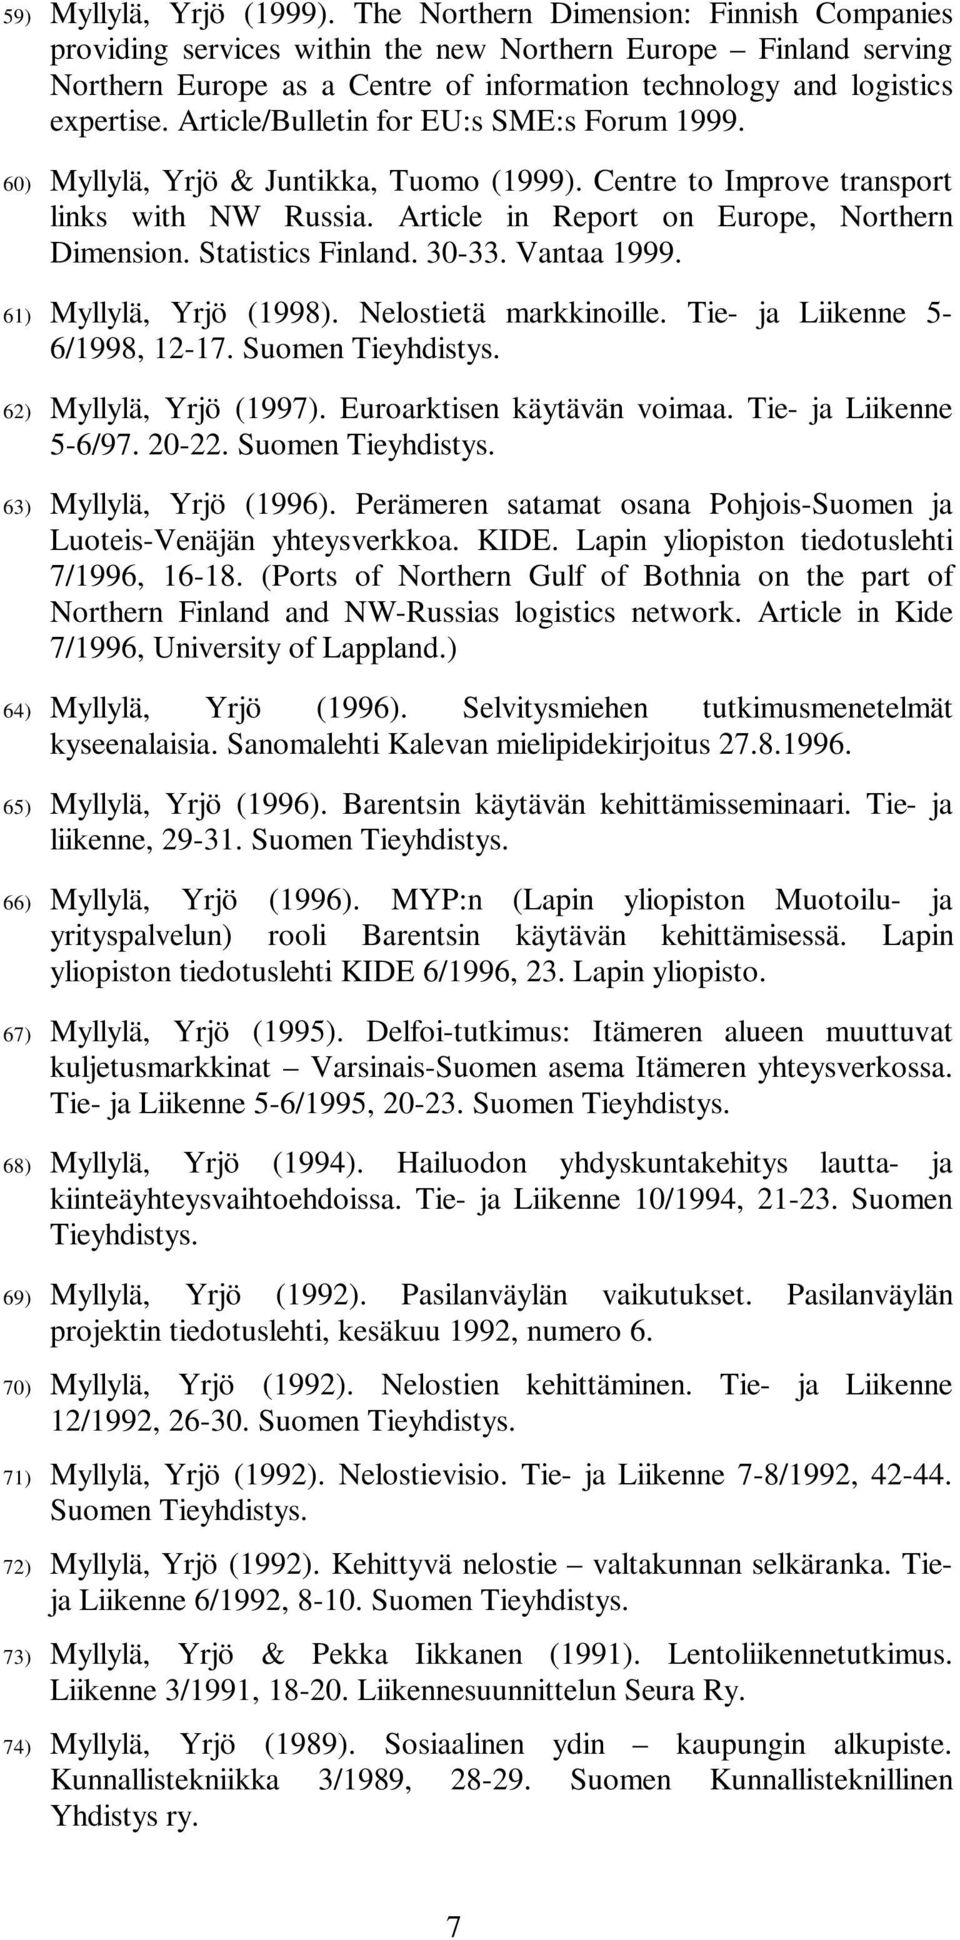 Article/Bulletin for EU:s SME:s Forum 1999. 60) Myllylä, Yrjö & Juntikka, Tuomo (1999). Centre to Improve transport links with NW Russia. Article in Report on Europe, Northern Dimension.